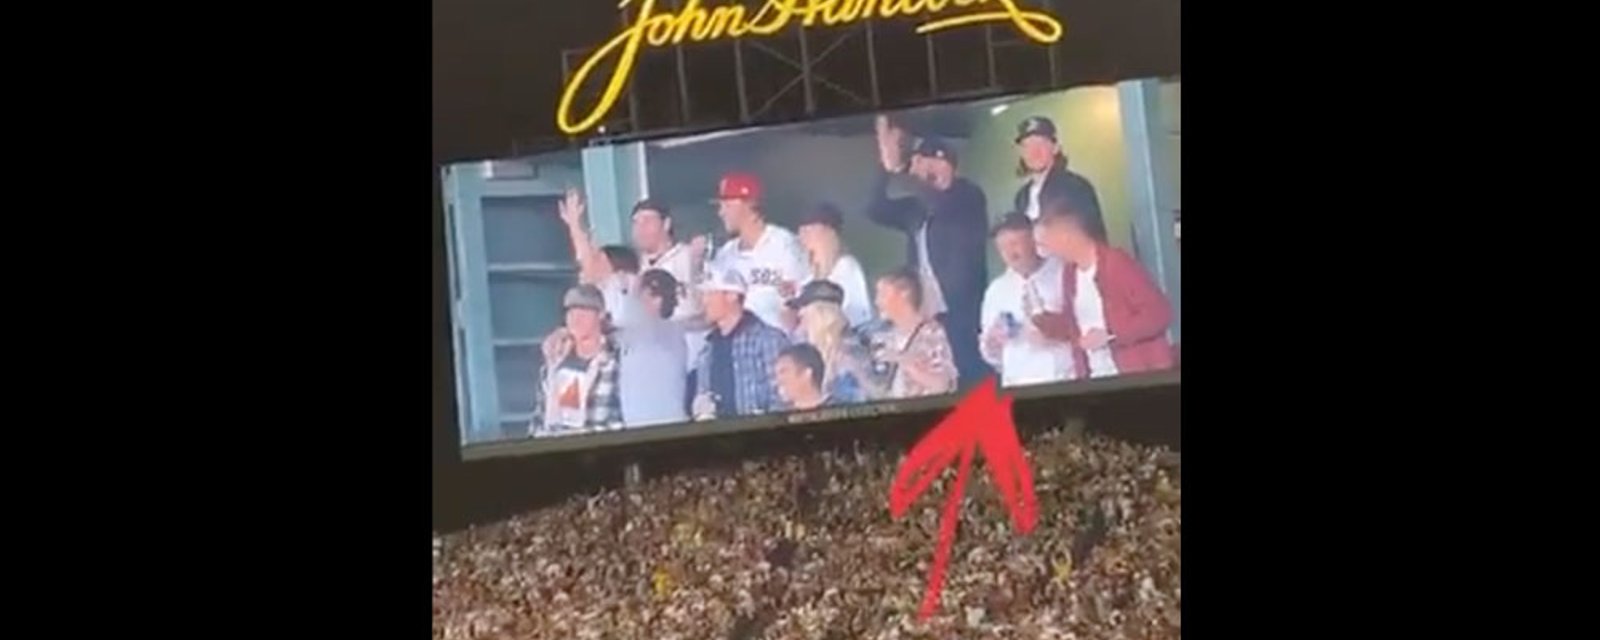 Jack Eichel parties with the Boston Bruins at Red Sox game